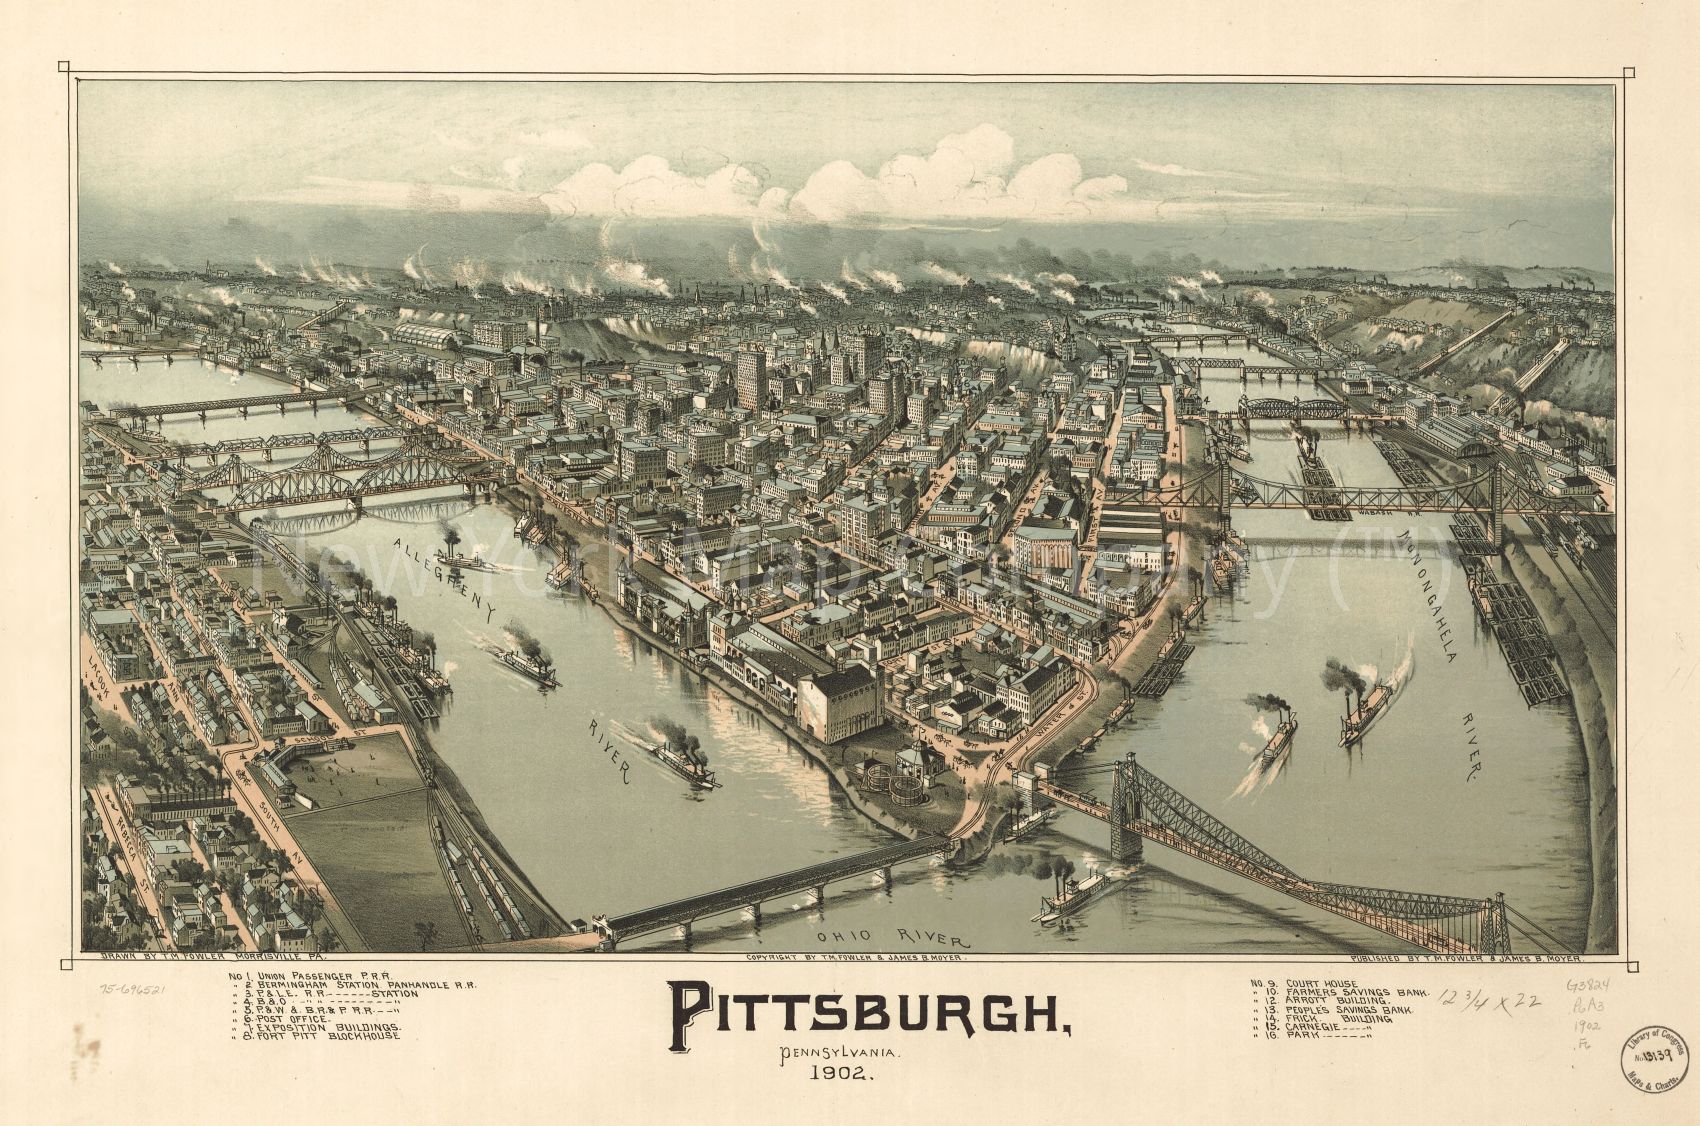 1902 map Pittsburgh, Pennsylvania 1902. Map Subjects: Pennsylvania | Pittsburgh | Pittsburgh Pa |